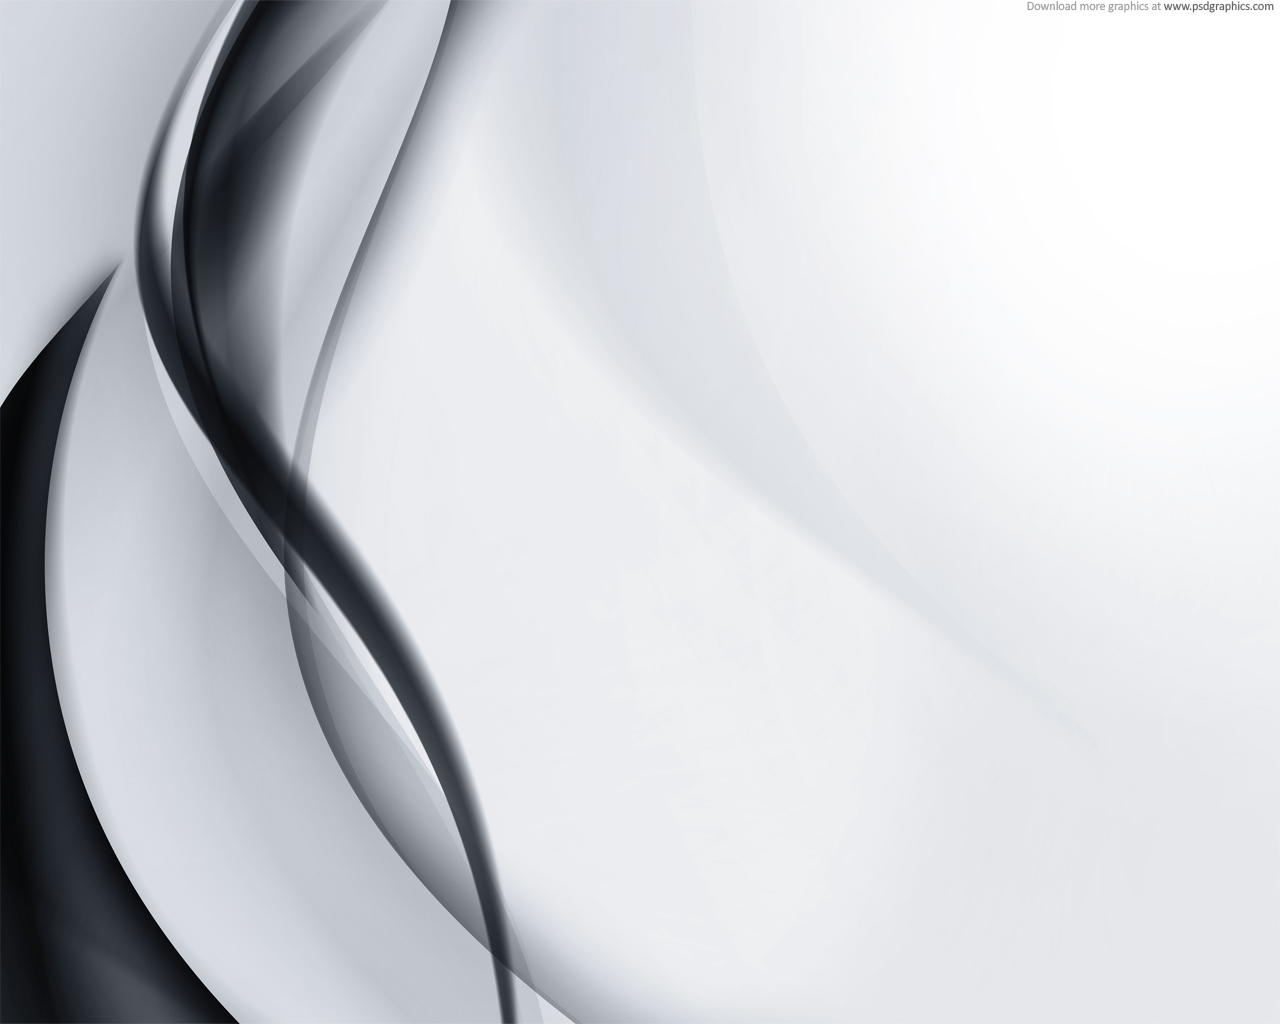 Medium size preview 1280x1024px Black and white abstract background 1280x1024